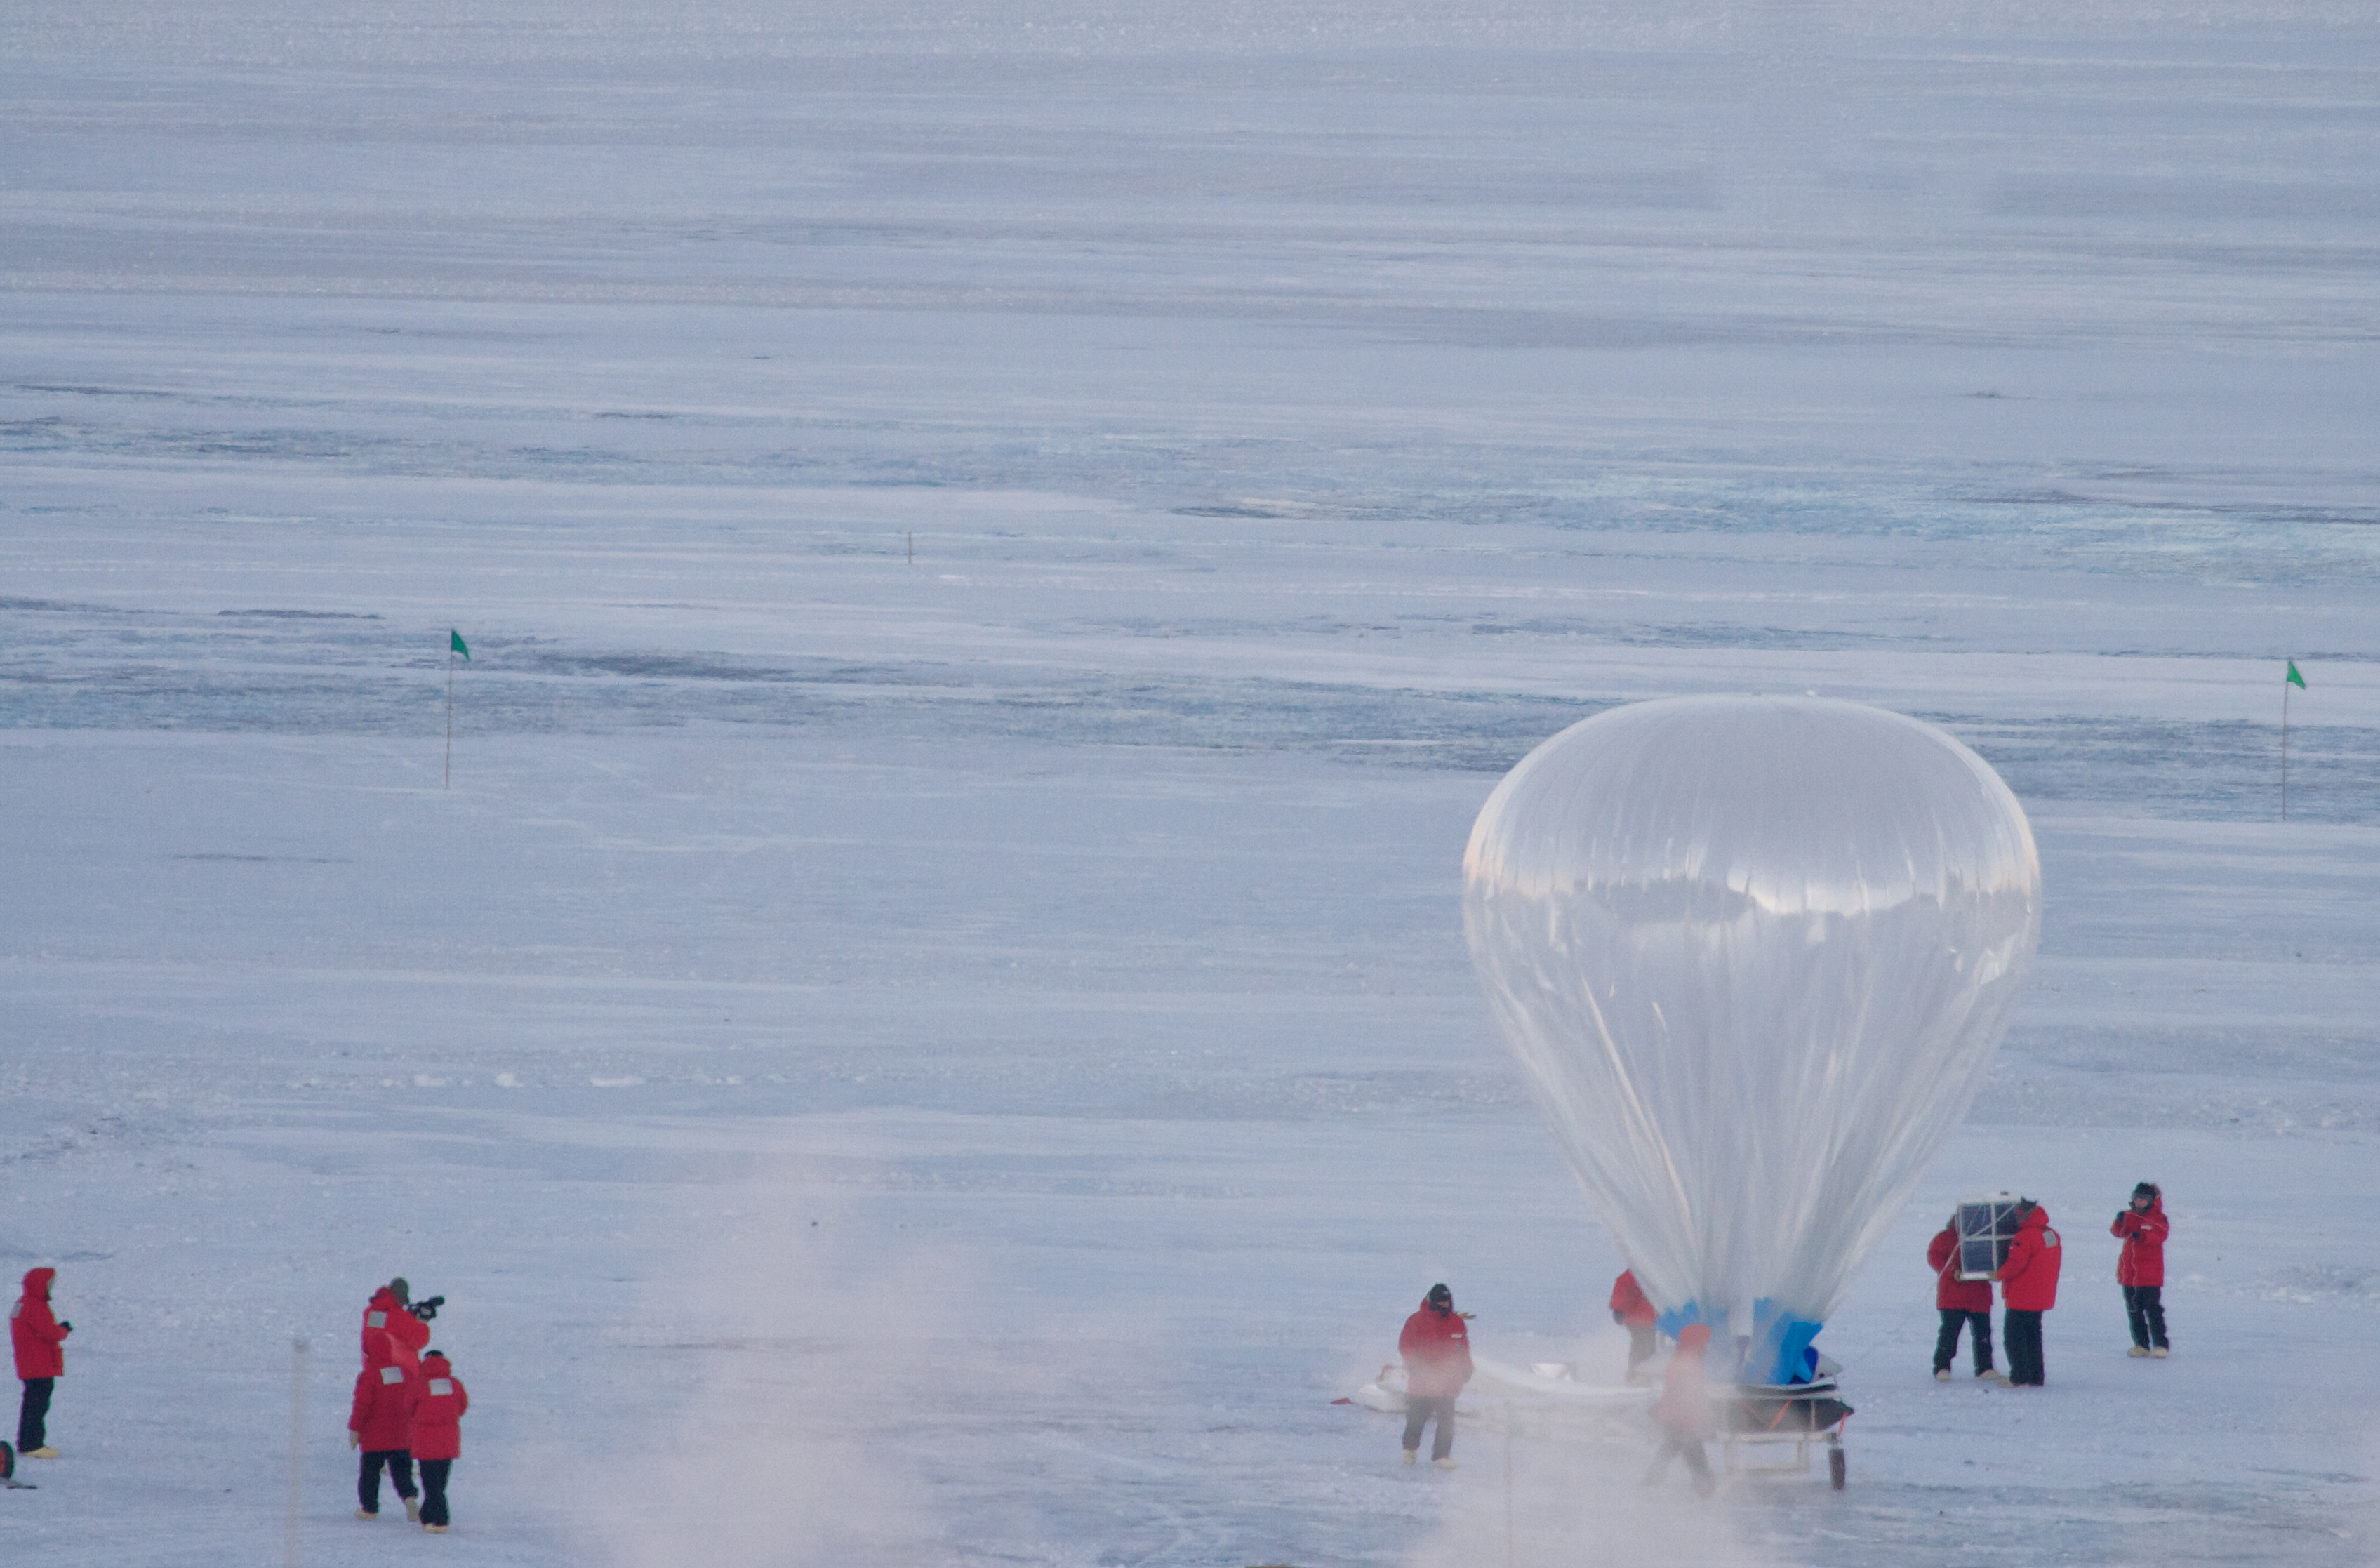 A large balloon being launched.